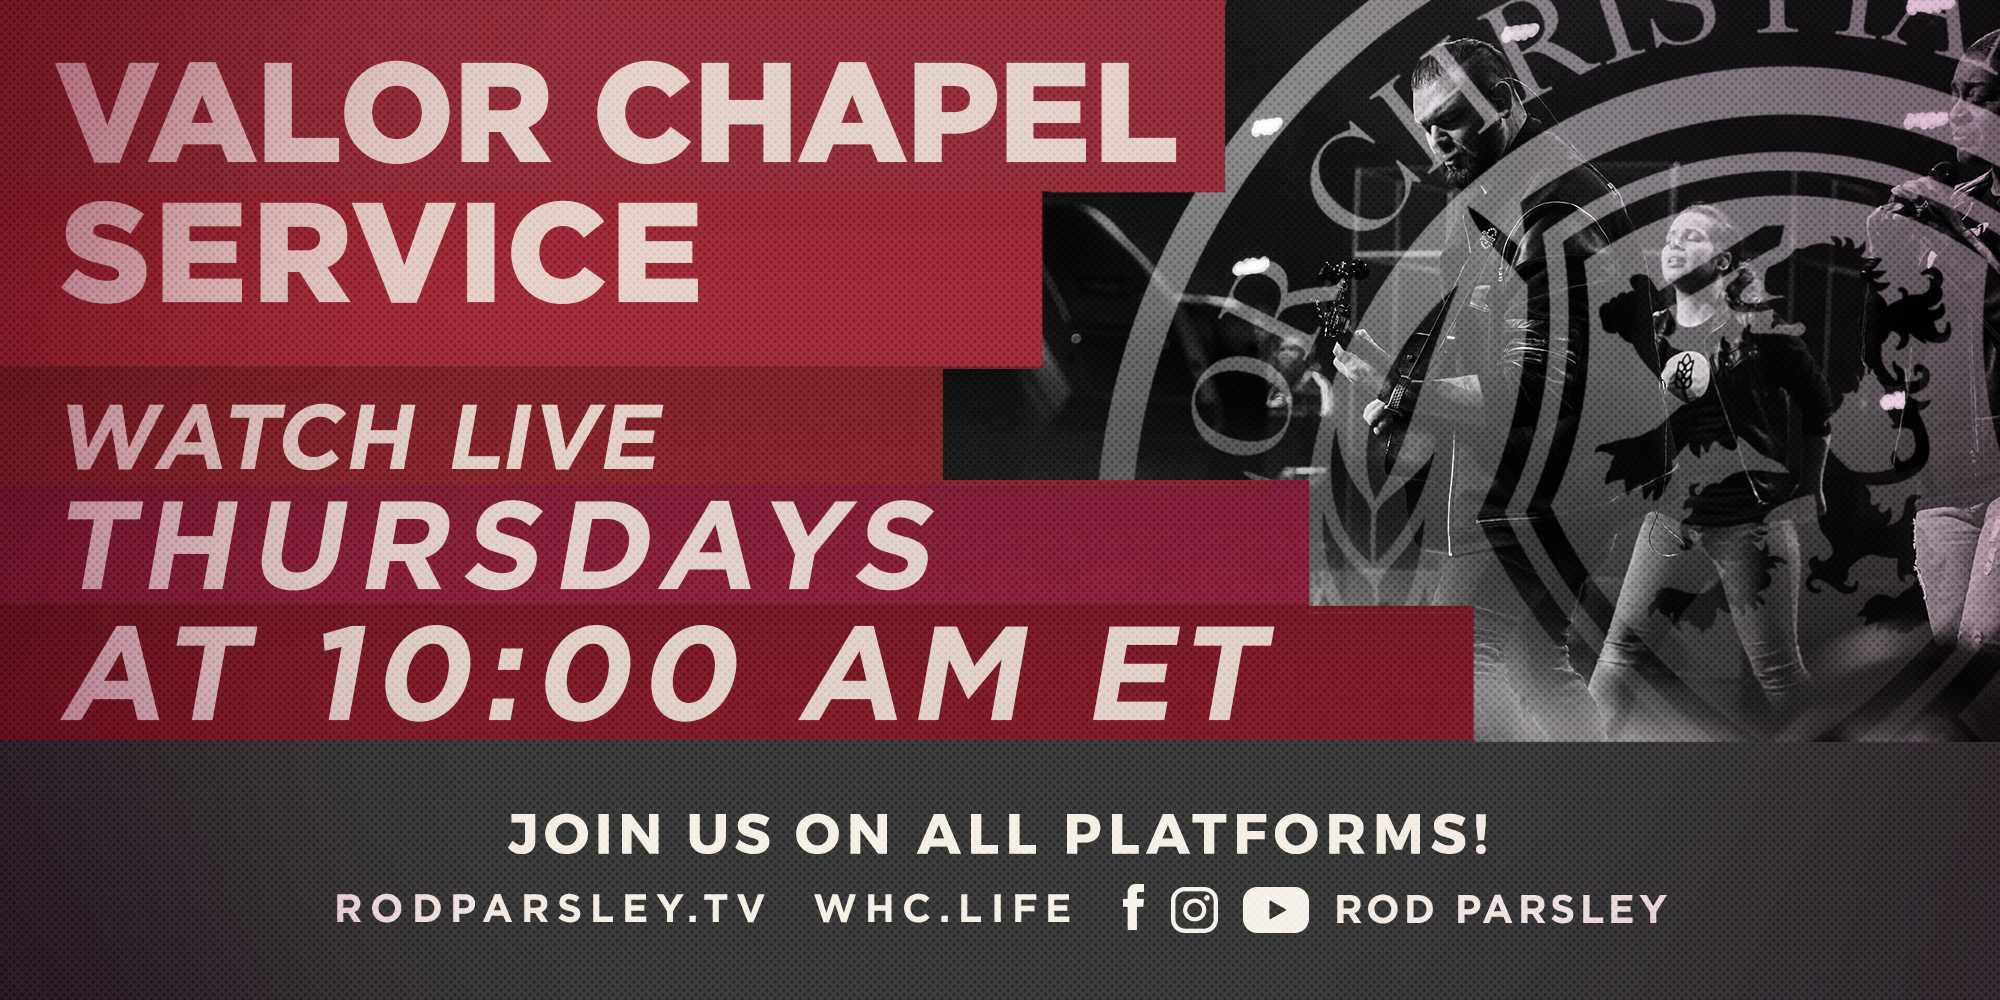 Valor Chapel Service Watch Live Thursdays at 10:00 Am Et Join Us on All Platforms! Rodparsley.Tv Whc.Life Facebook Youtube Instagram Rod Parsley